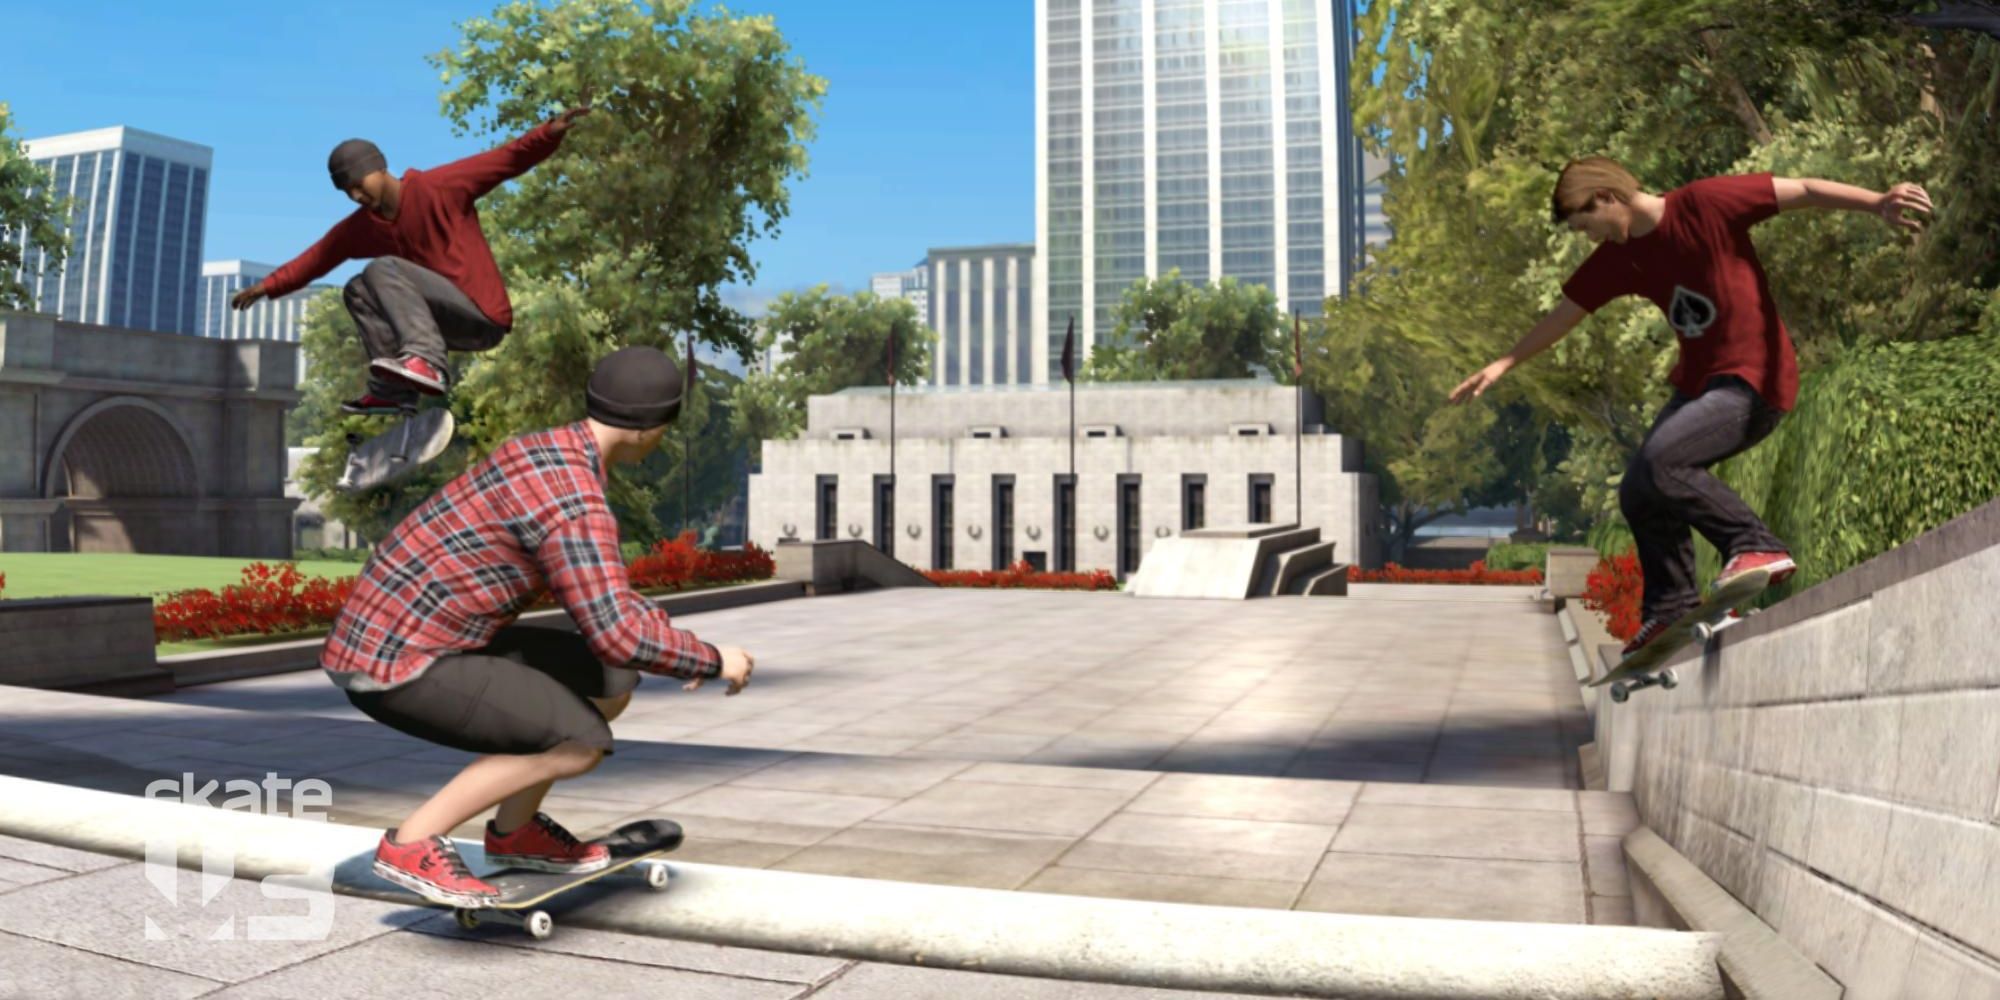 Skate 3, 3 guys doing jumps on a walkway